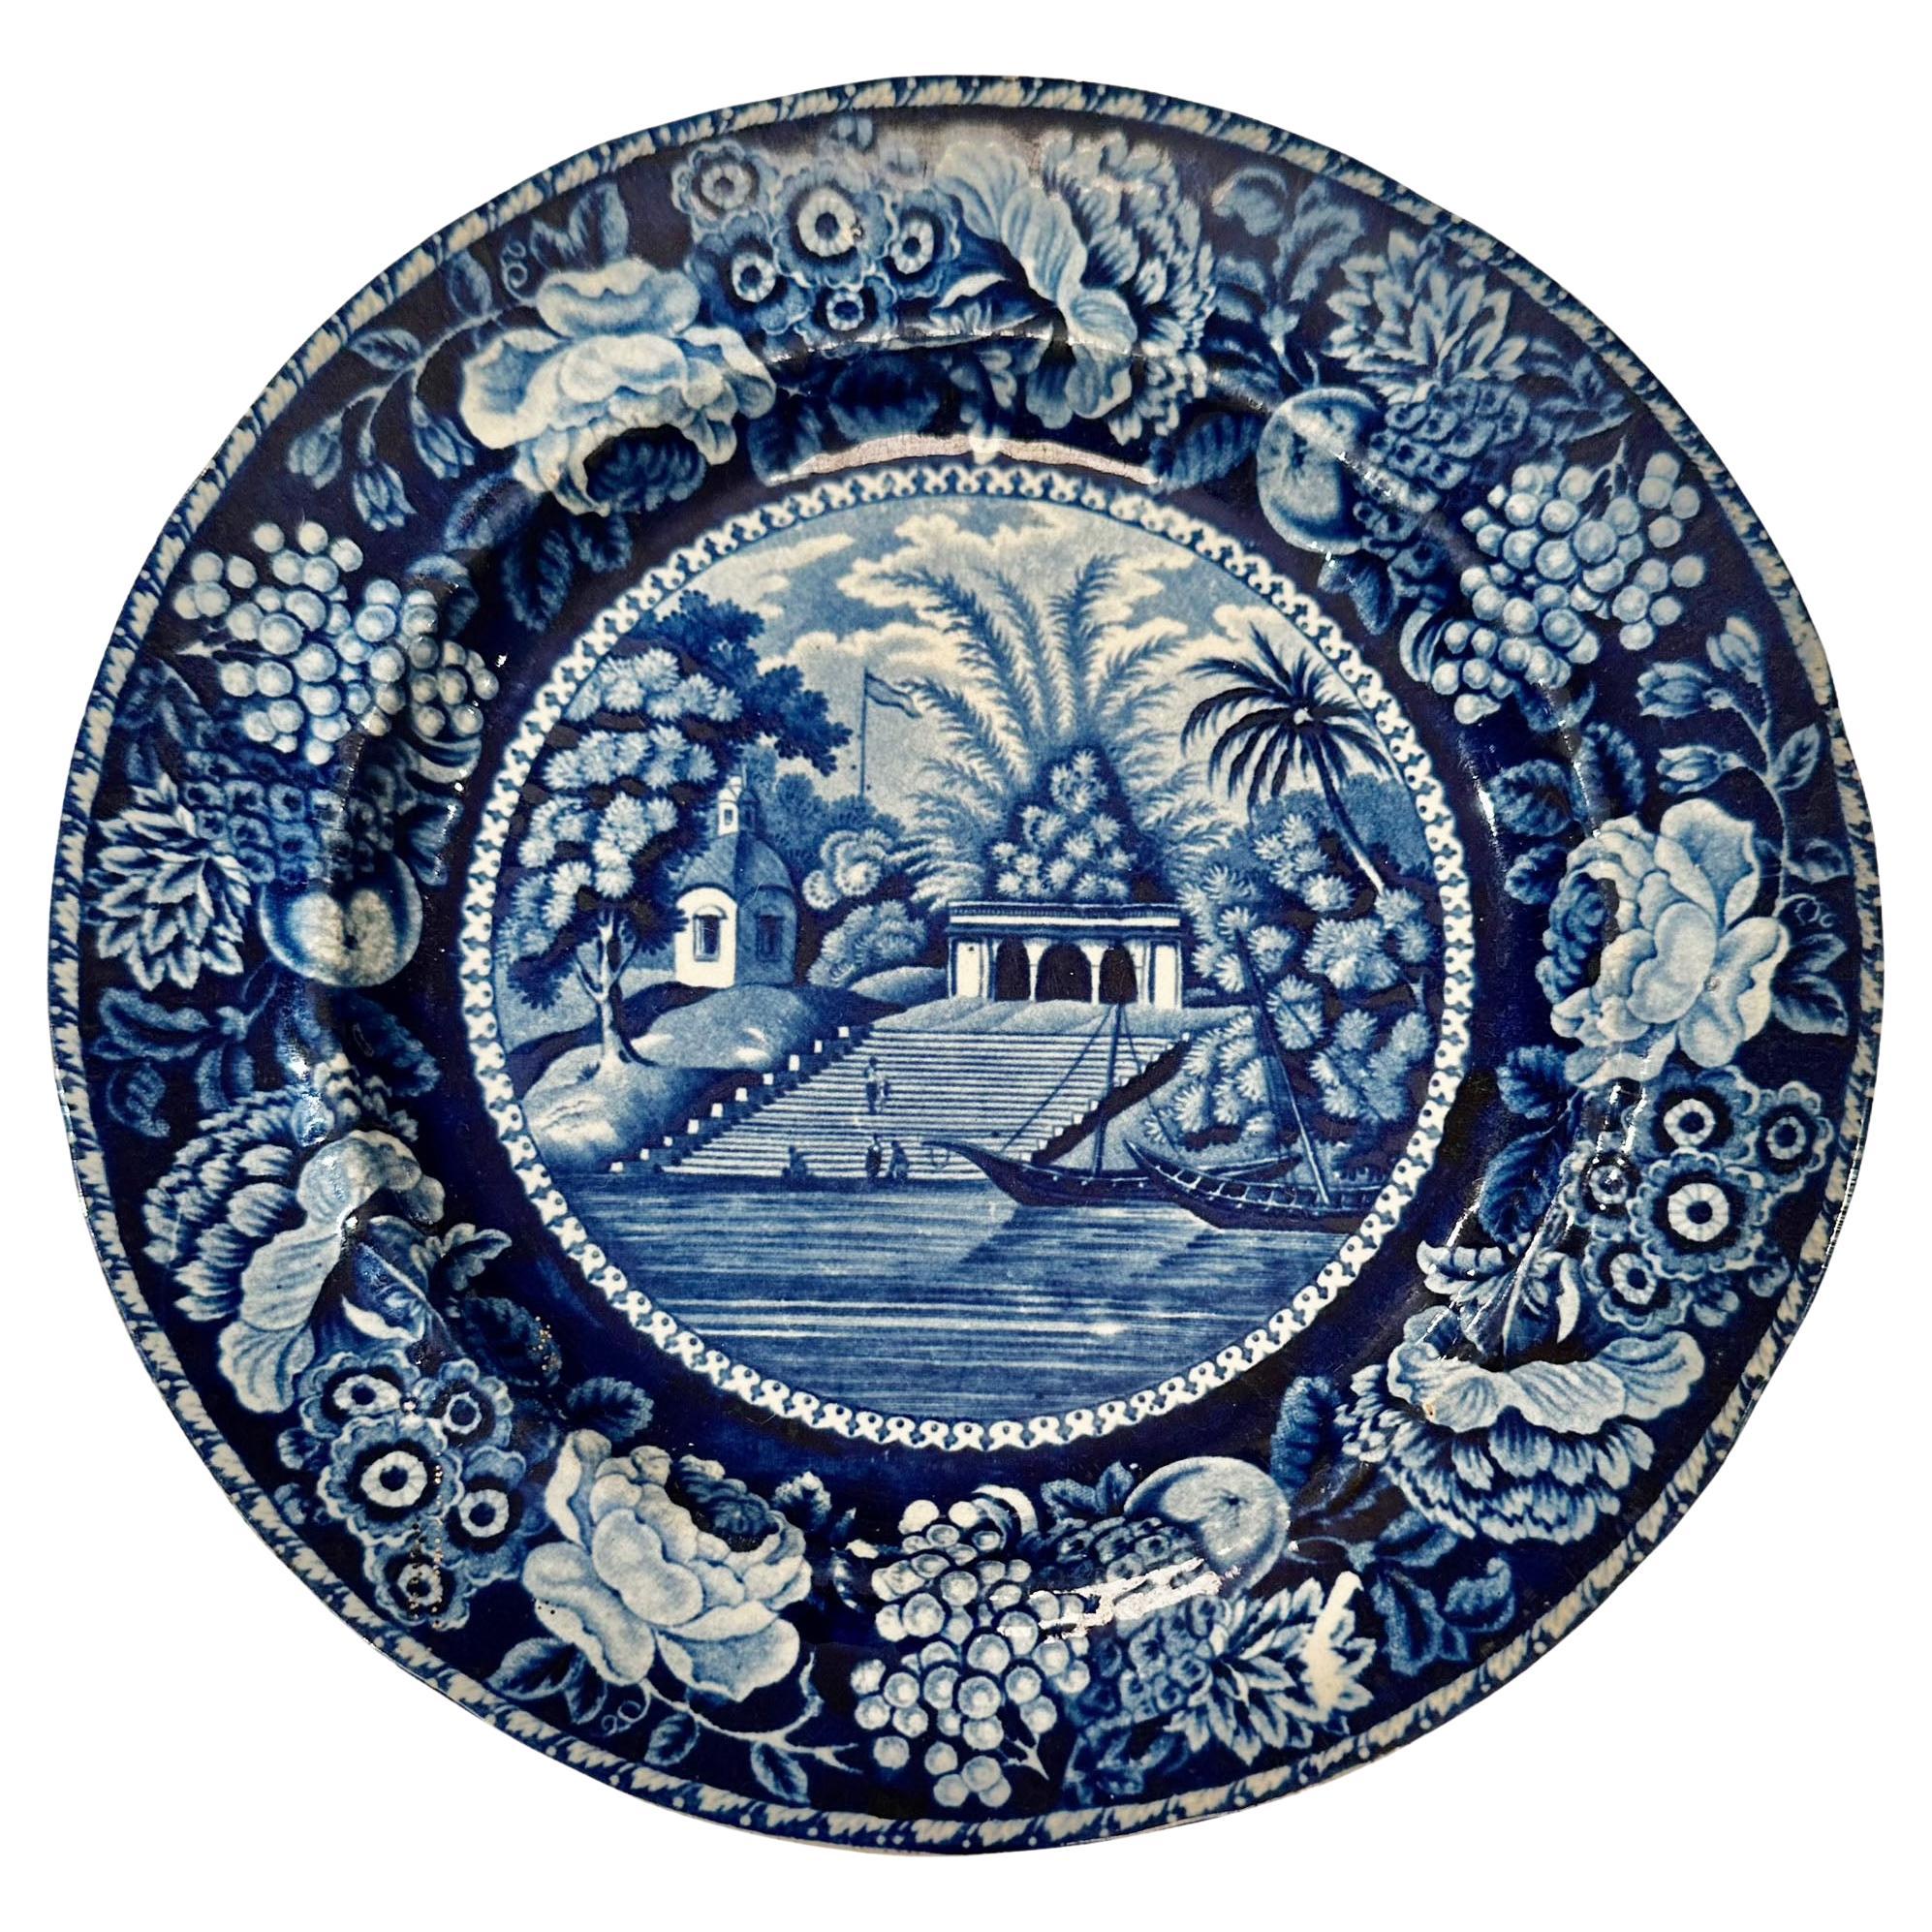 Transfer Ware Plate By Staffordshire 